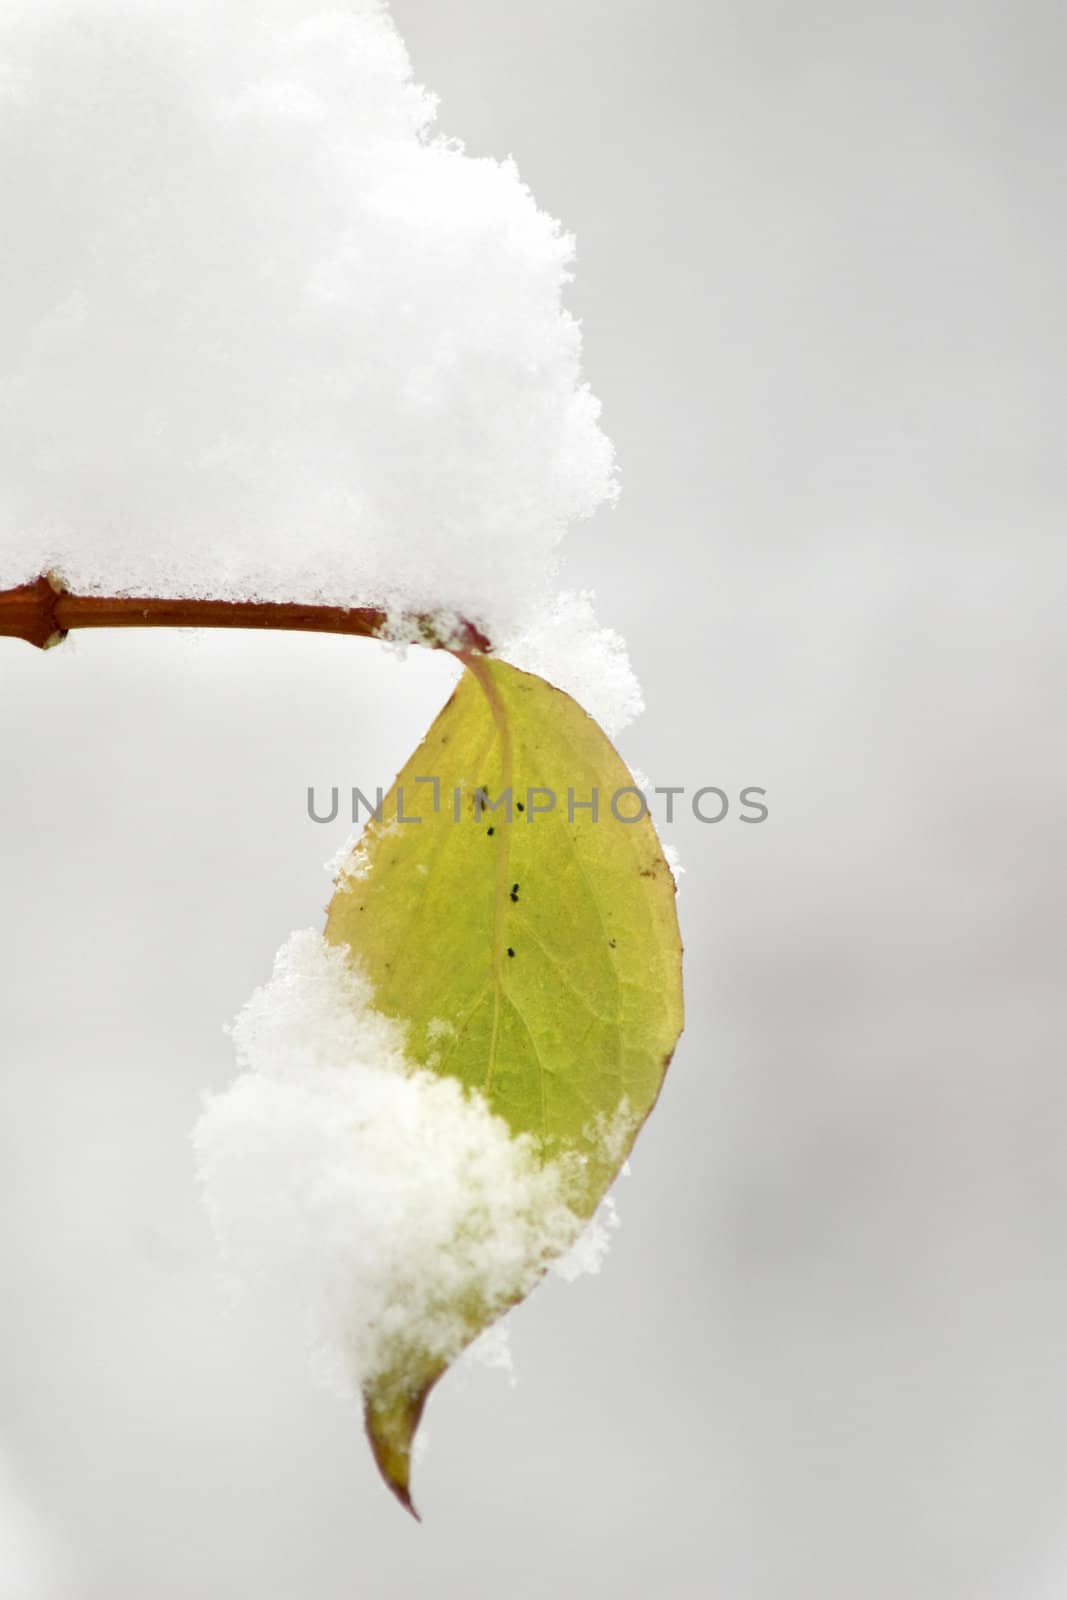 An image of green leaf and snow